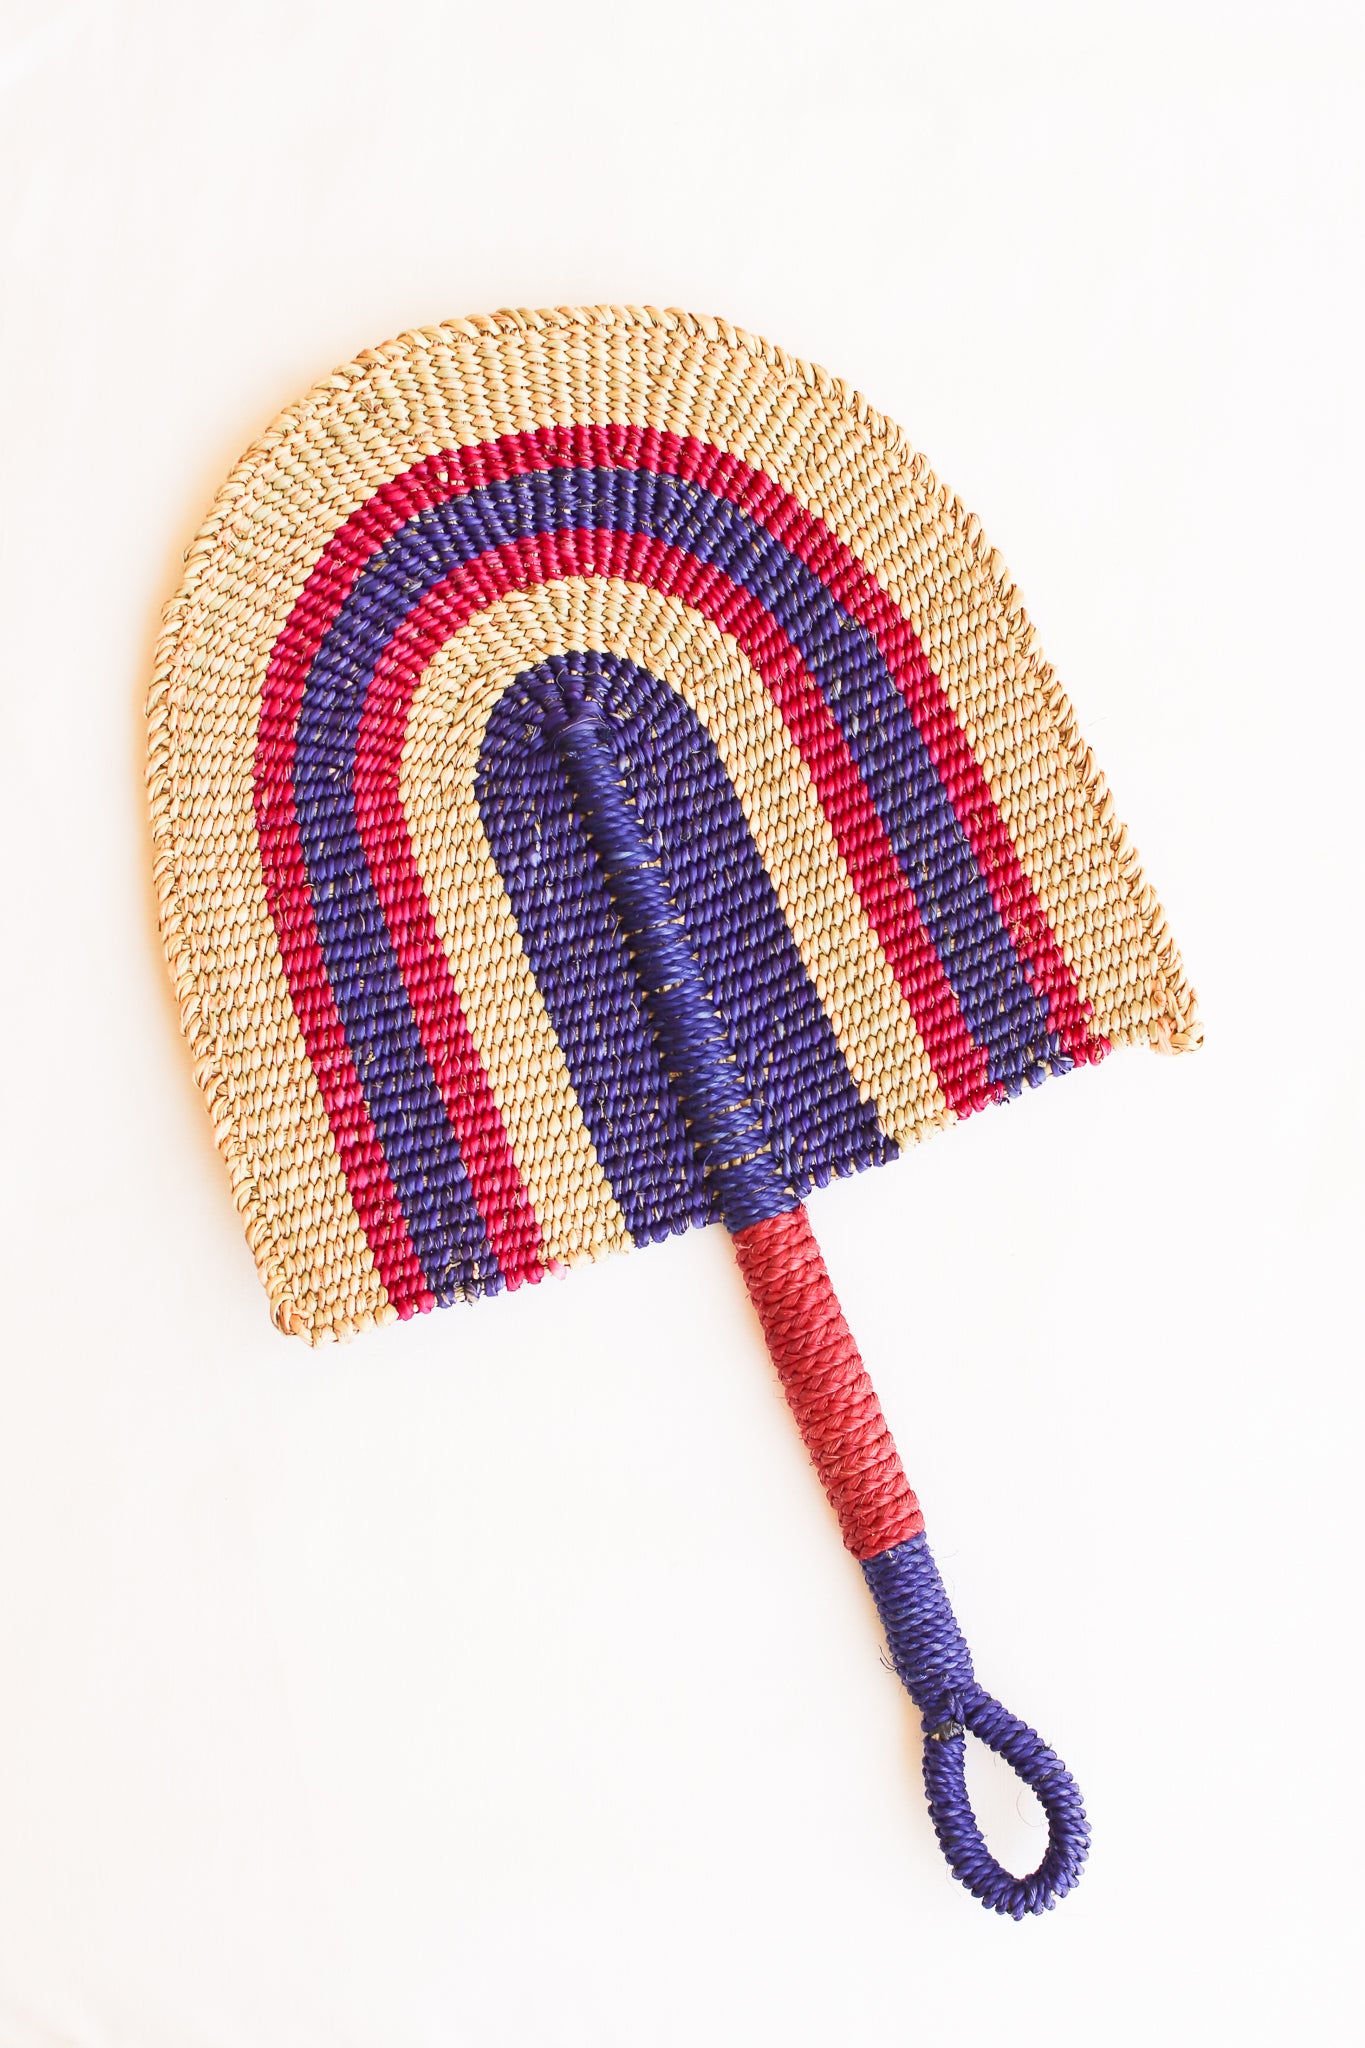 Woven Fan, Natural and Jewel Tones